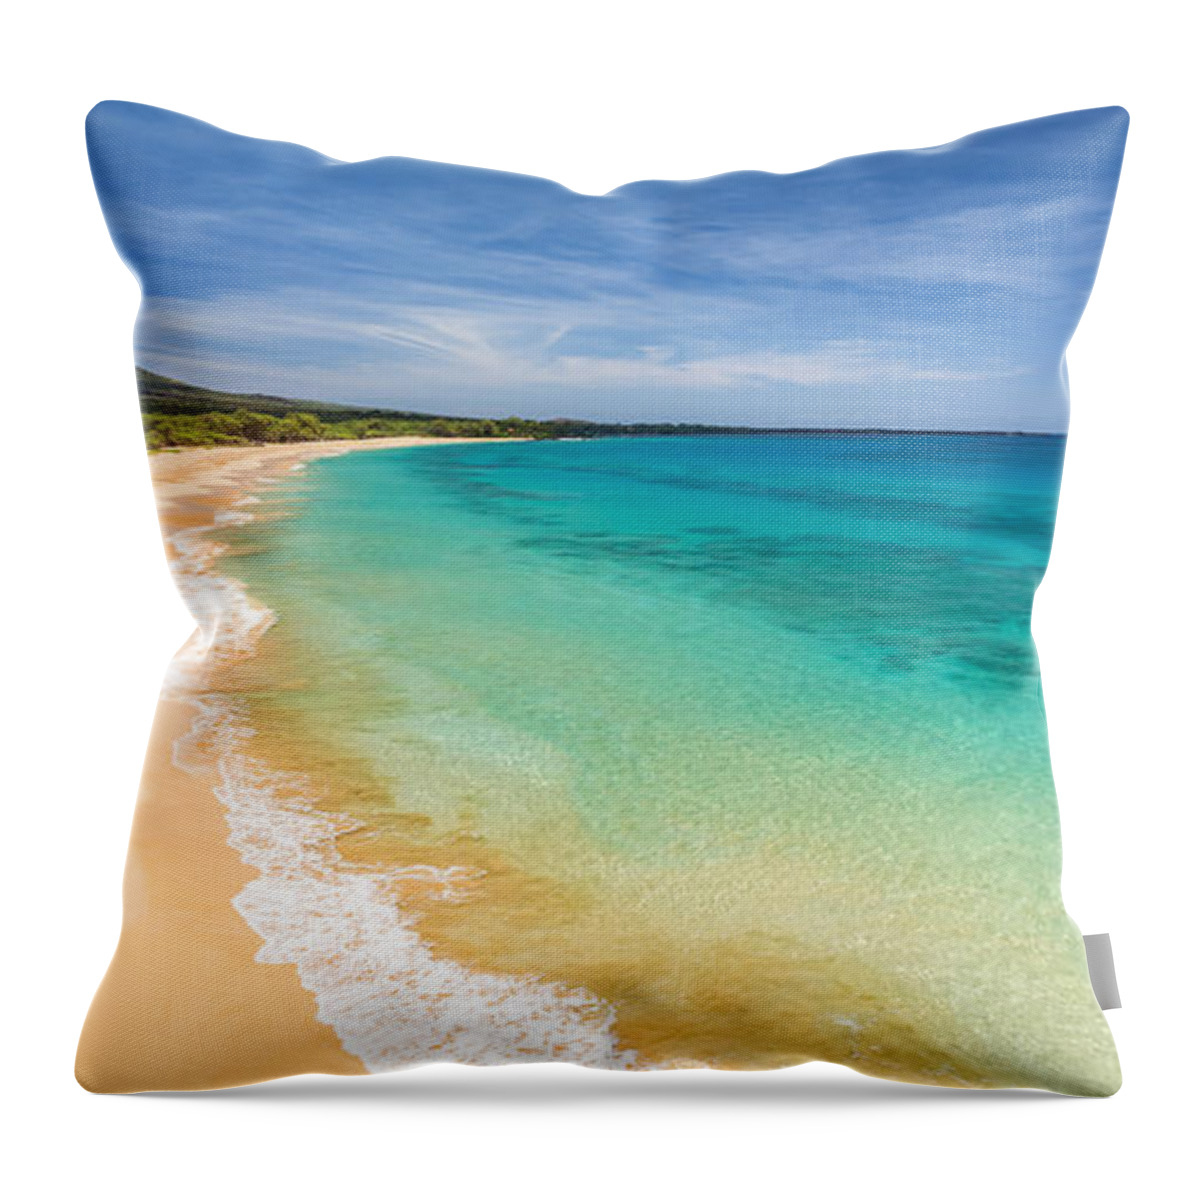 Turquoise Blue Throw Pillow featuring the photograph Blue Makena Beach Maui by Pierre Leclerc Photography